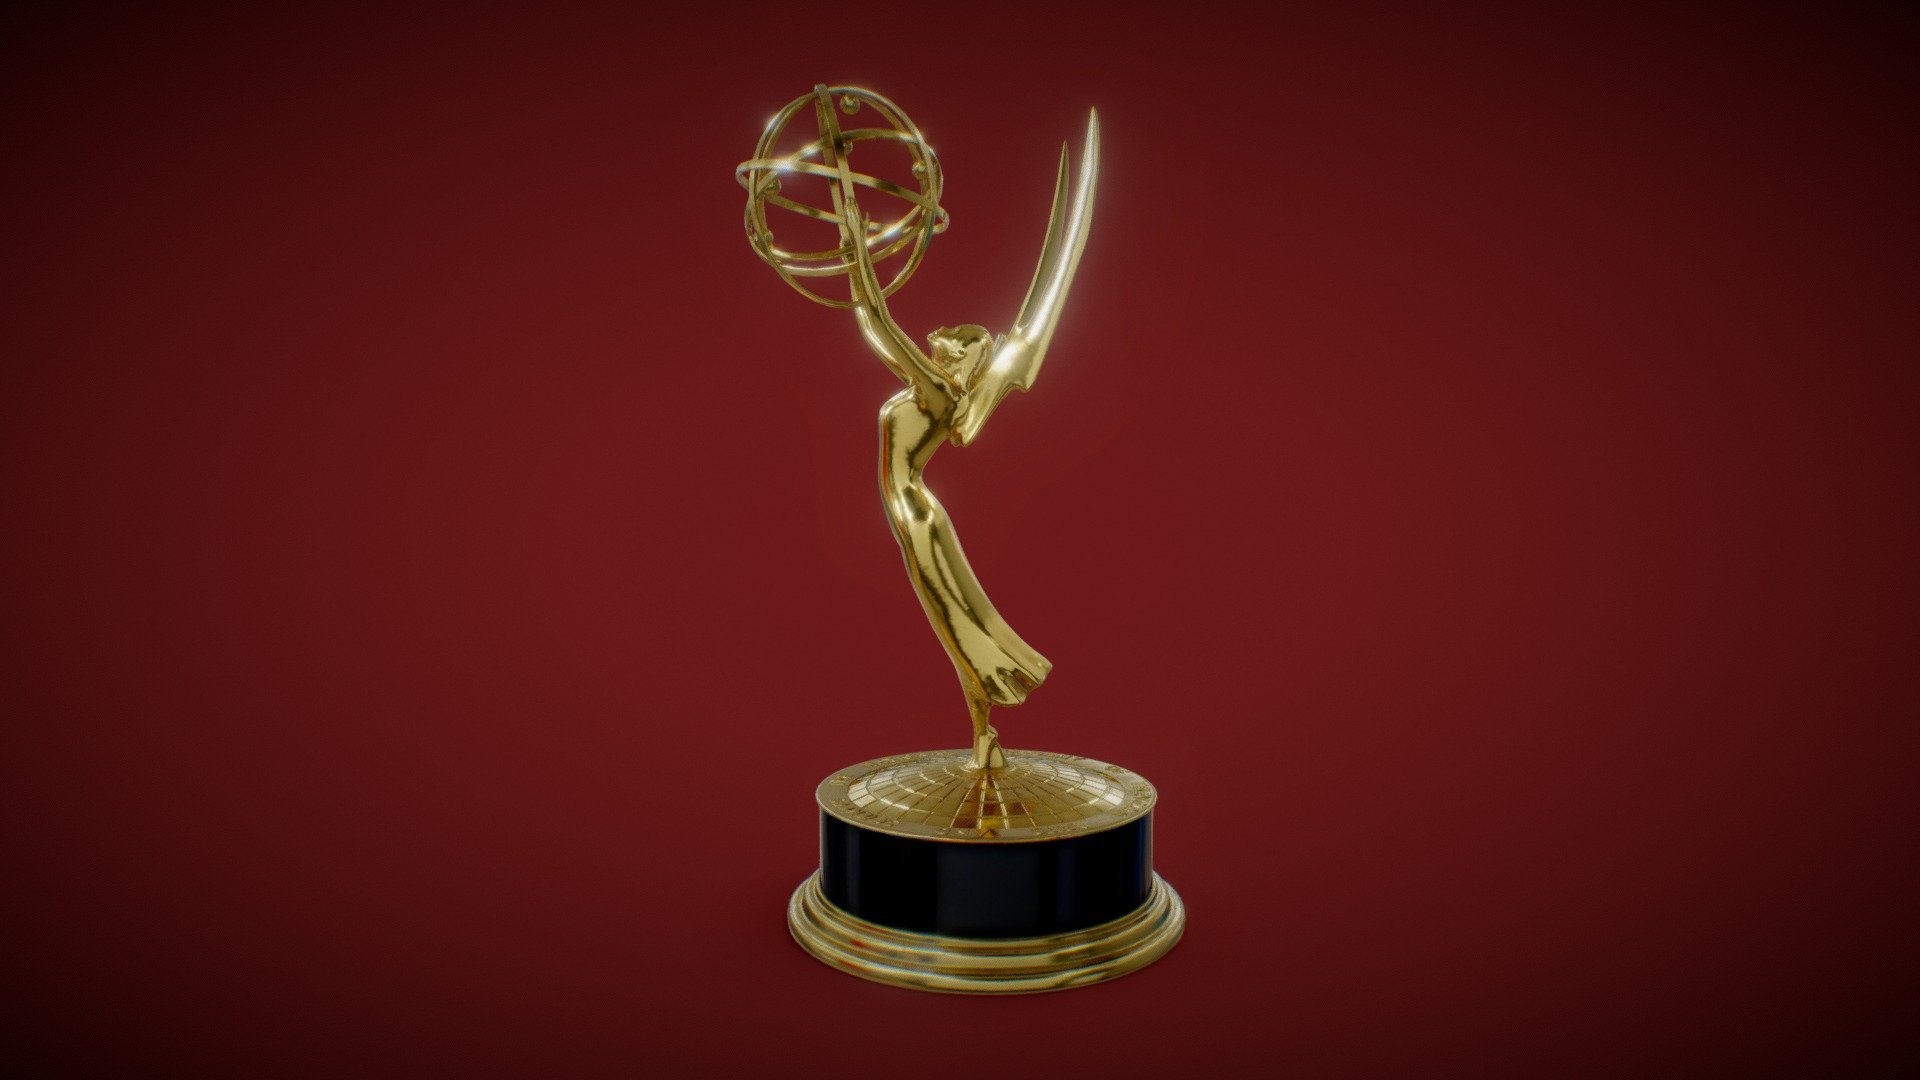 An Accurate Model of The Emmy Awards Statuette Trophy

High poly sculpt,3D Printing STL file version is included in the Additional files 
High Quality 4K PBR textures 
Perfect for both real-time and pre-rendered applications

Feel free to contact me if you have any questions, hope you like it :) - The Emmy Awards Statuette Trophy - Buy Royalty Free 3D model by Deftroy 3d model